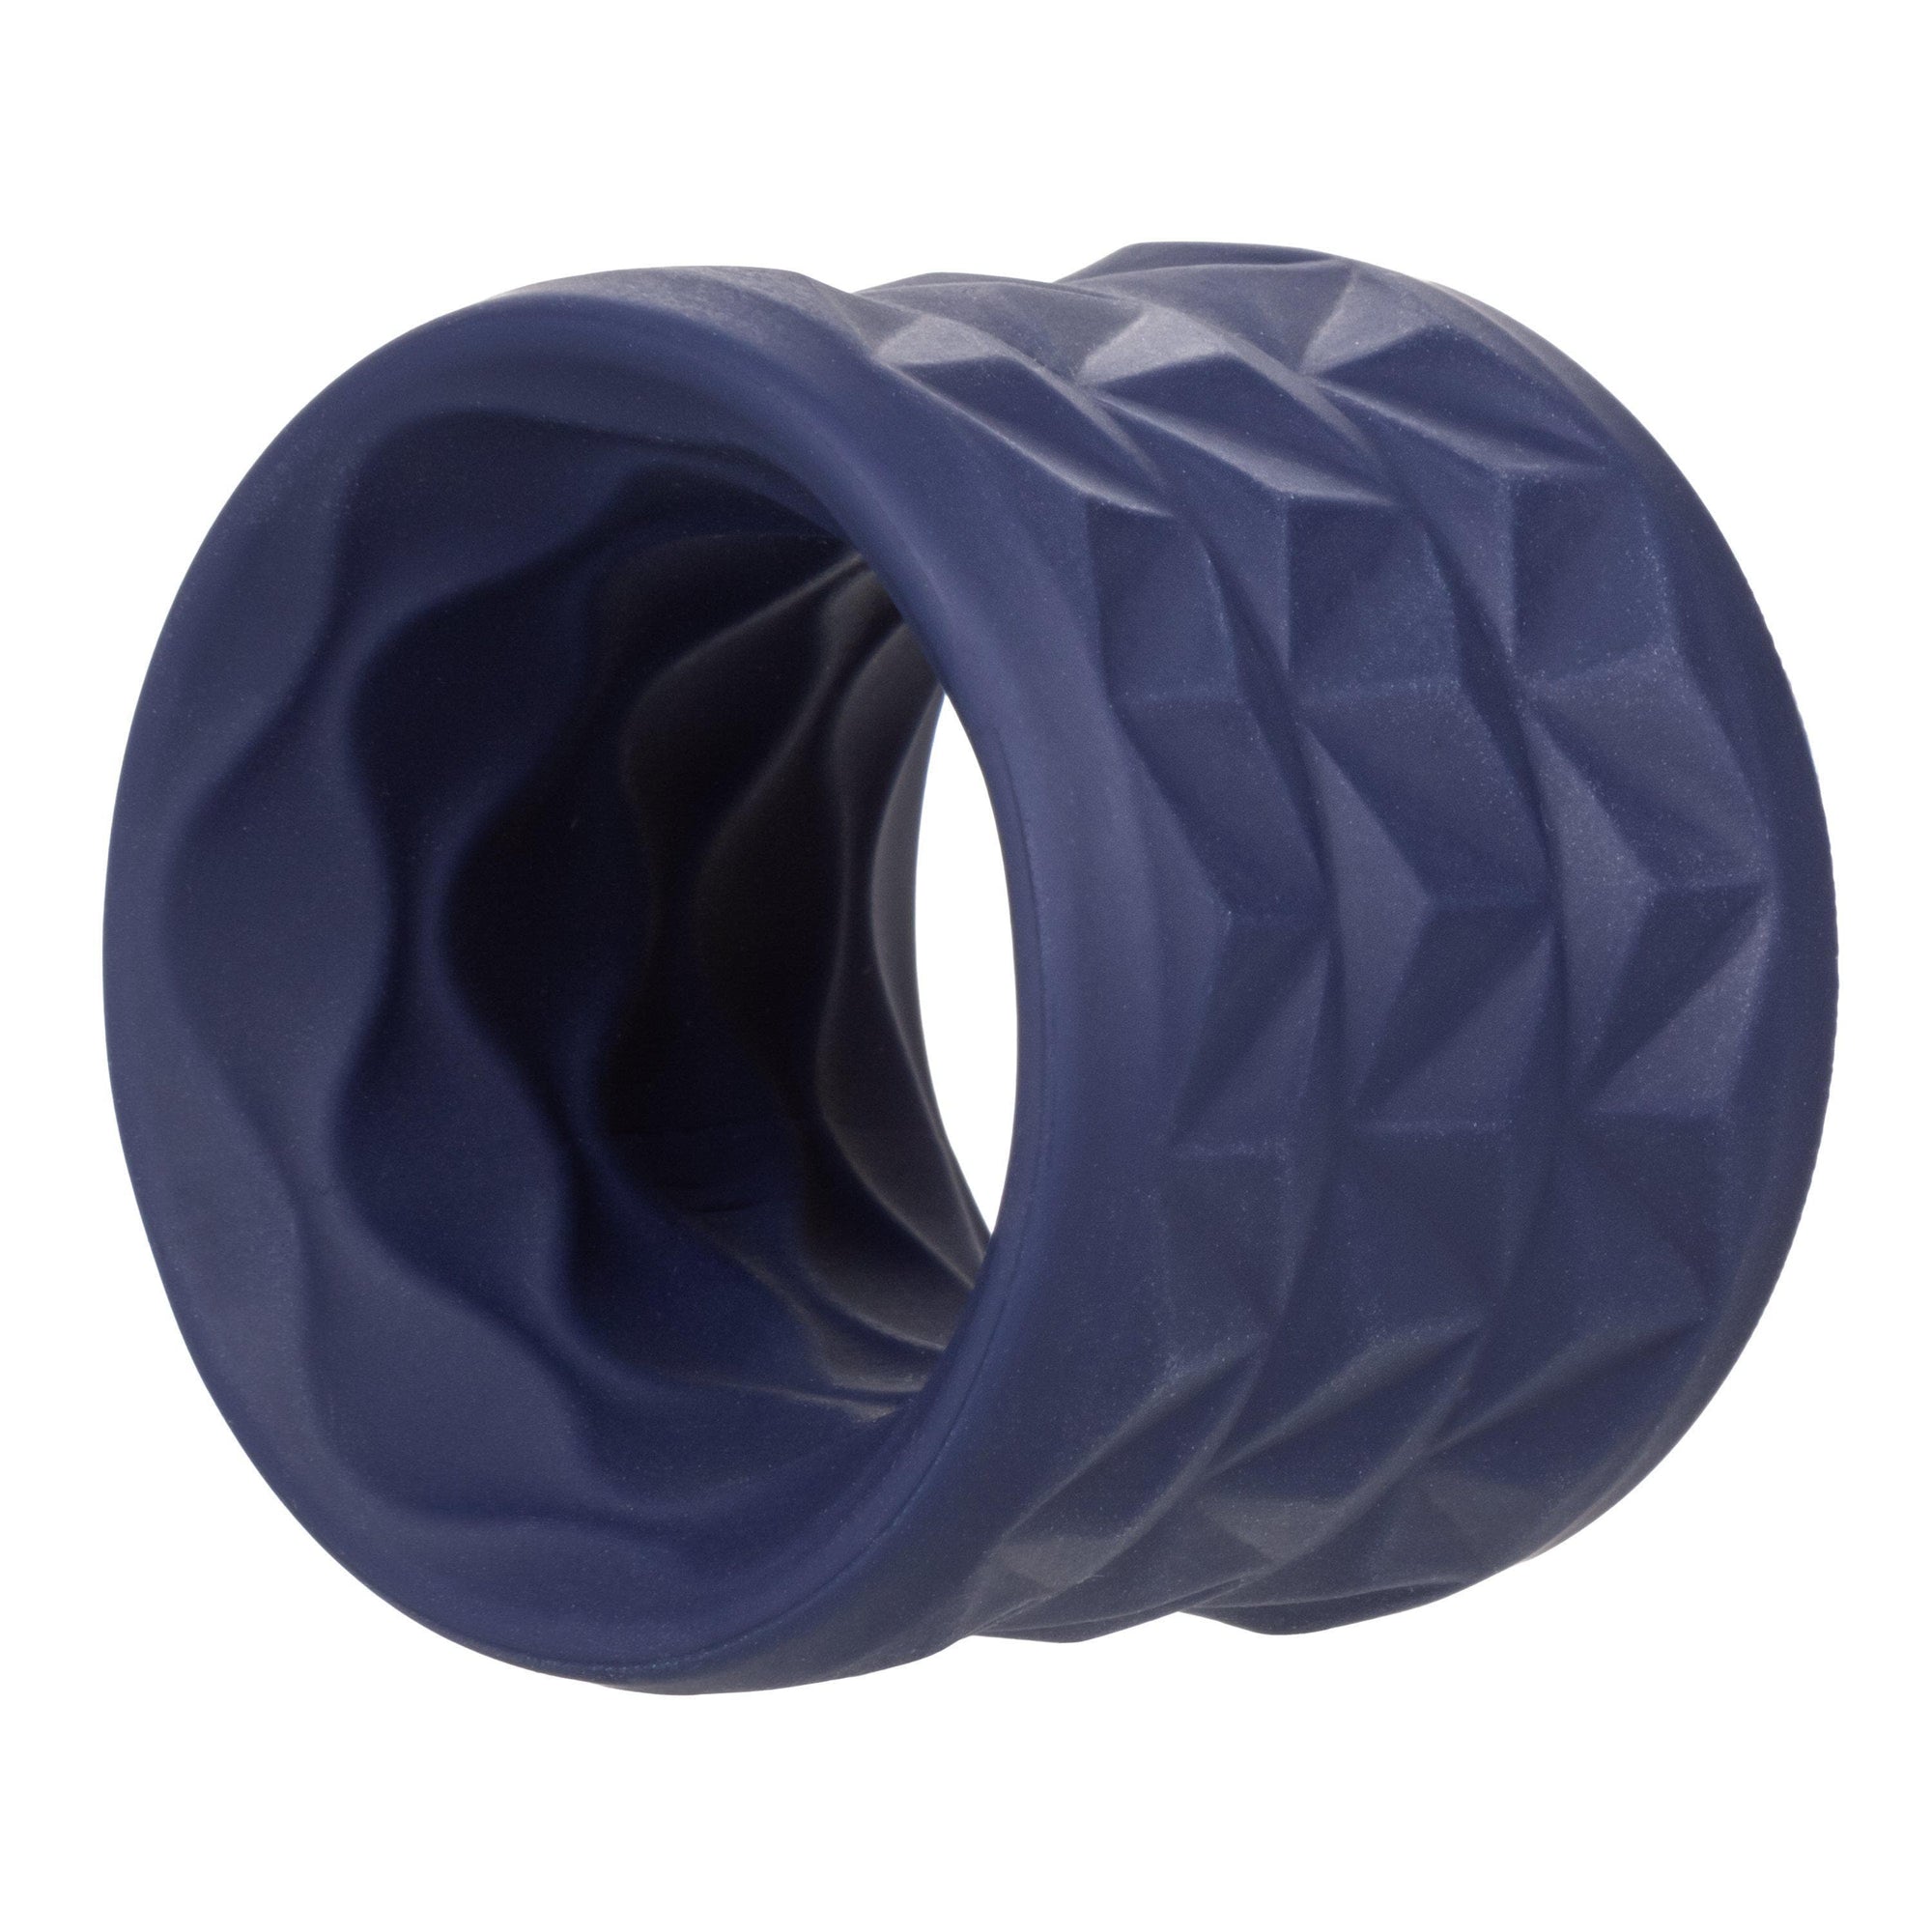 Viceroy Reverse Endurance Ring Silicone Penis Ring - Romantic Blessings